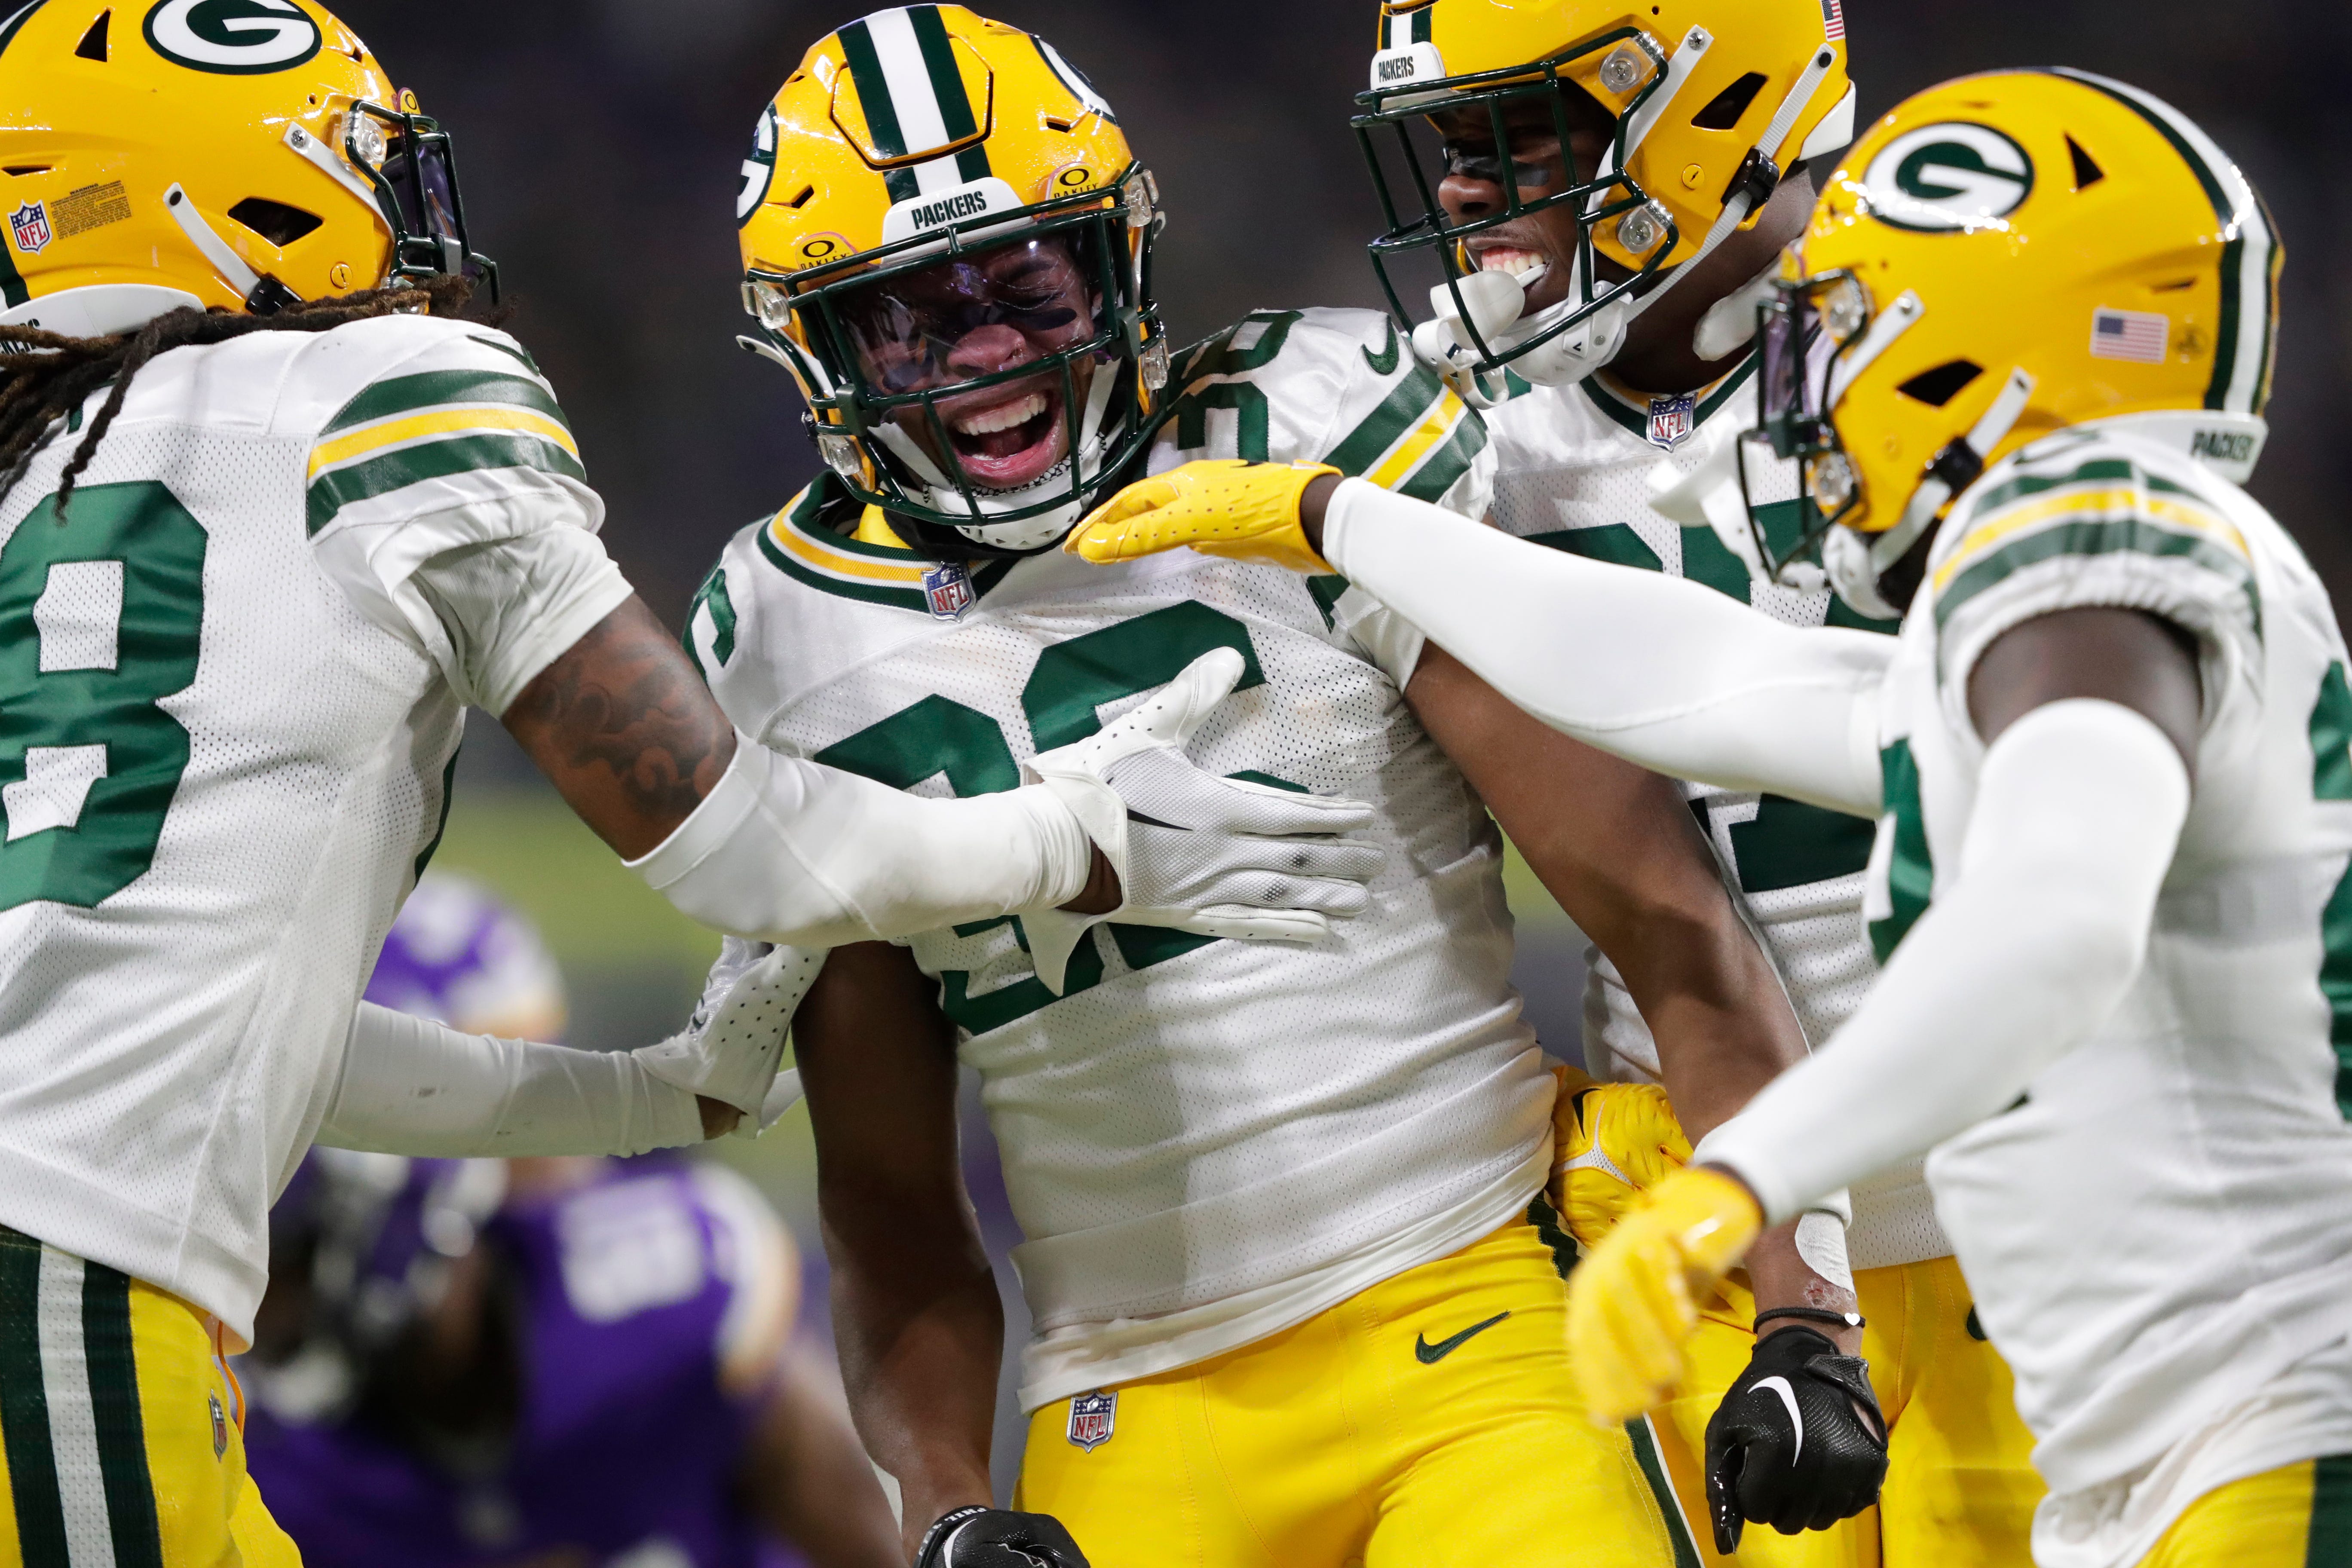 Green Bay Packers safety Anthony Johnson Jr. (36) is swarmed by teammates after making a special teams tackle against Minnesota Vikings running back Kene Nwangwu (26) during their football game Sunday, December 31, 2023, at U.S. Bank Stadium in Minneapolis, Minnesota.